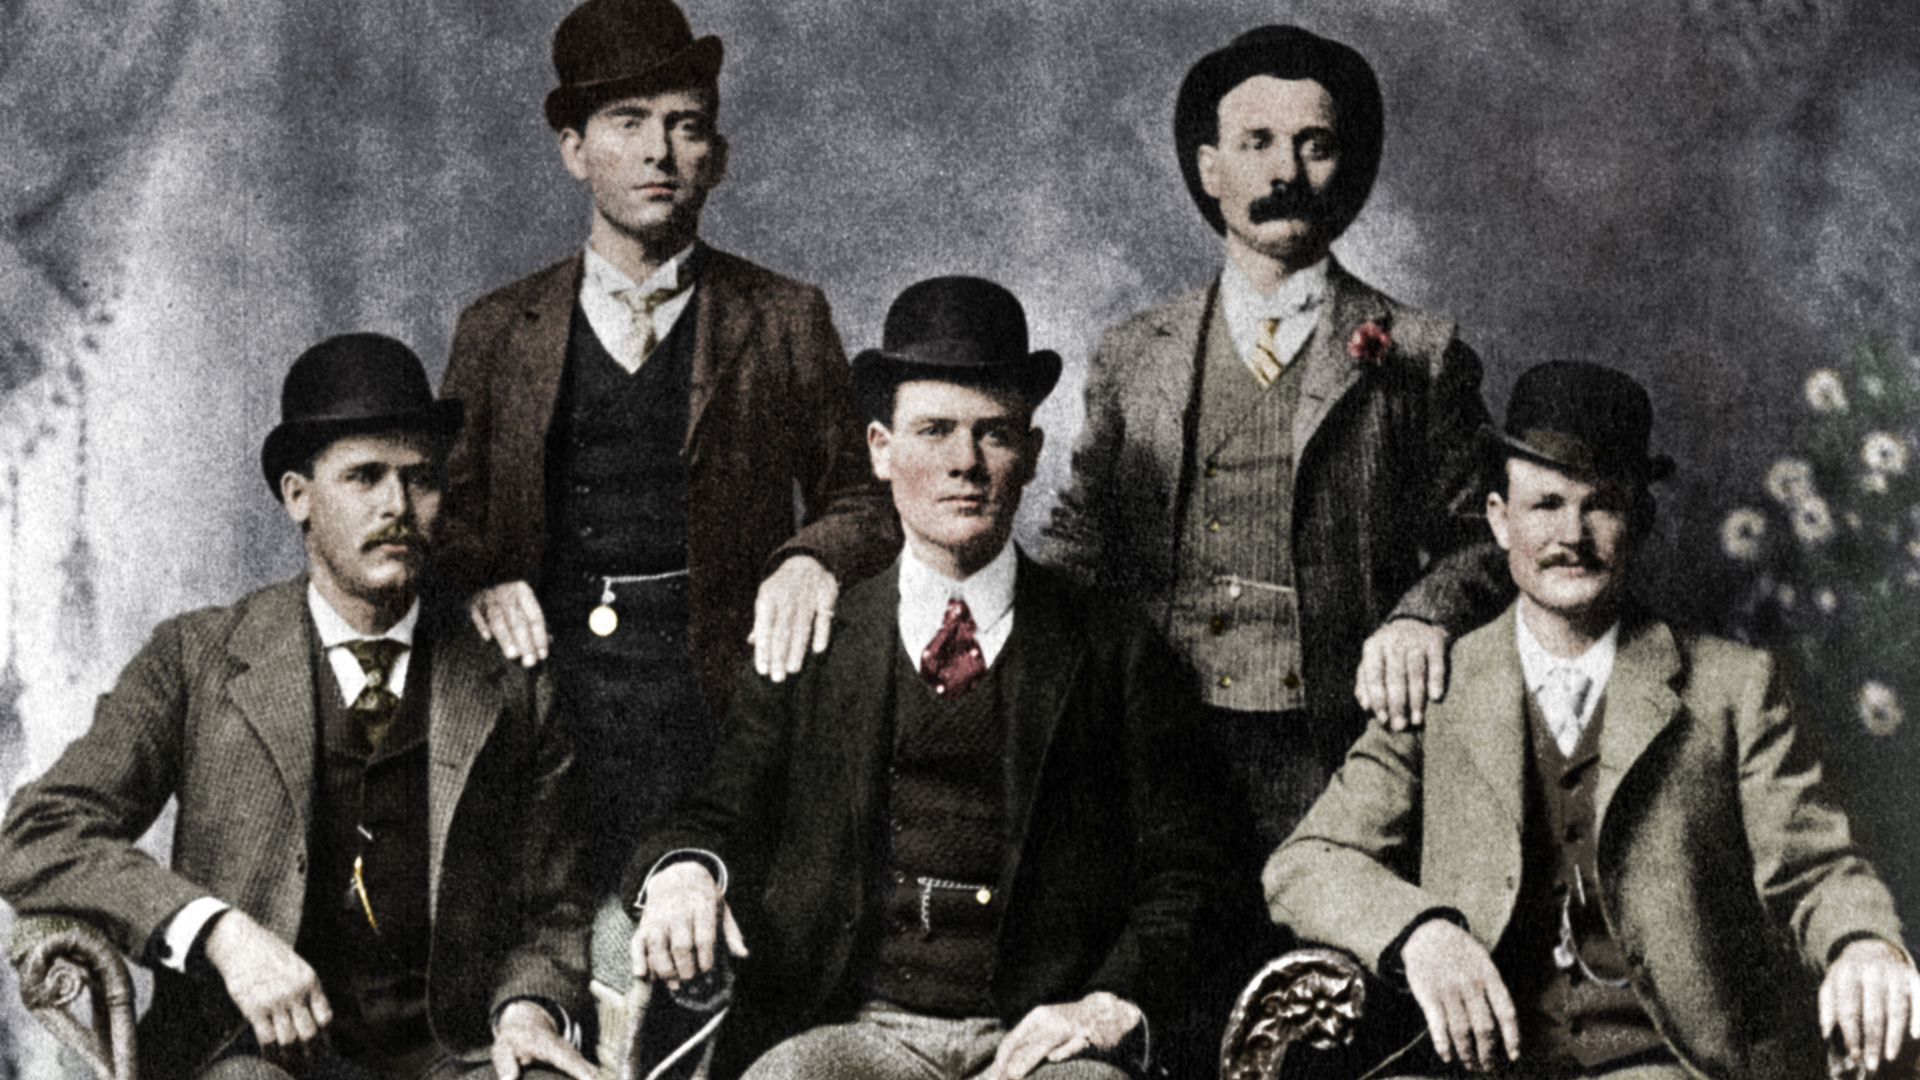 Butch Cassidy and the Sundance Kid: Their Biggest Heists